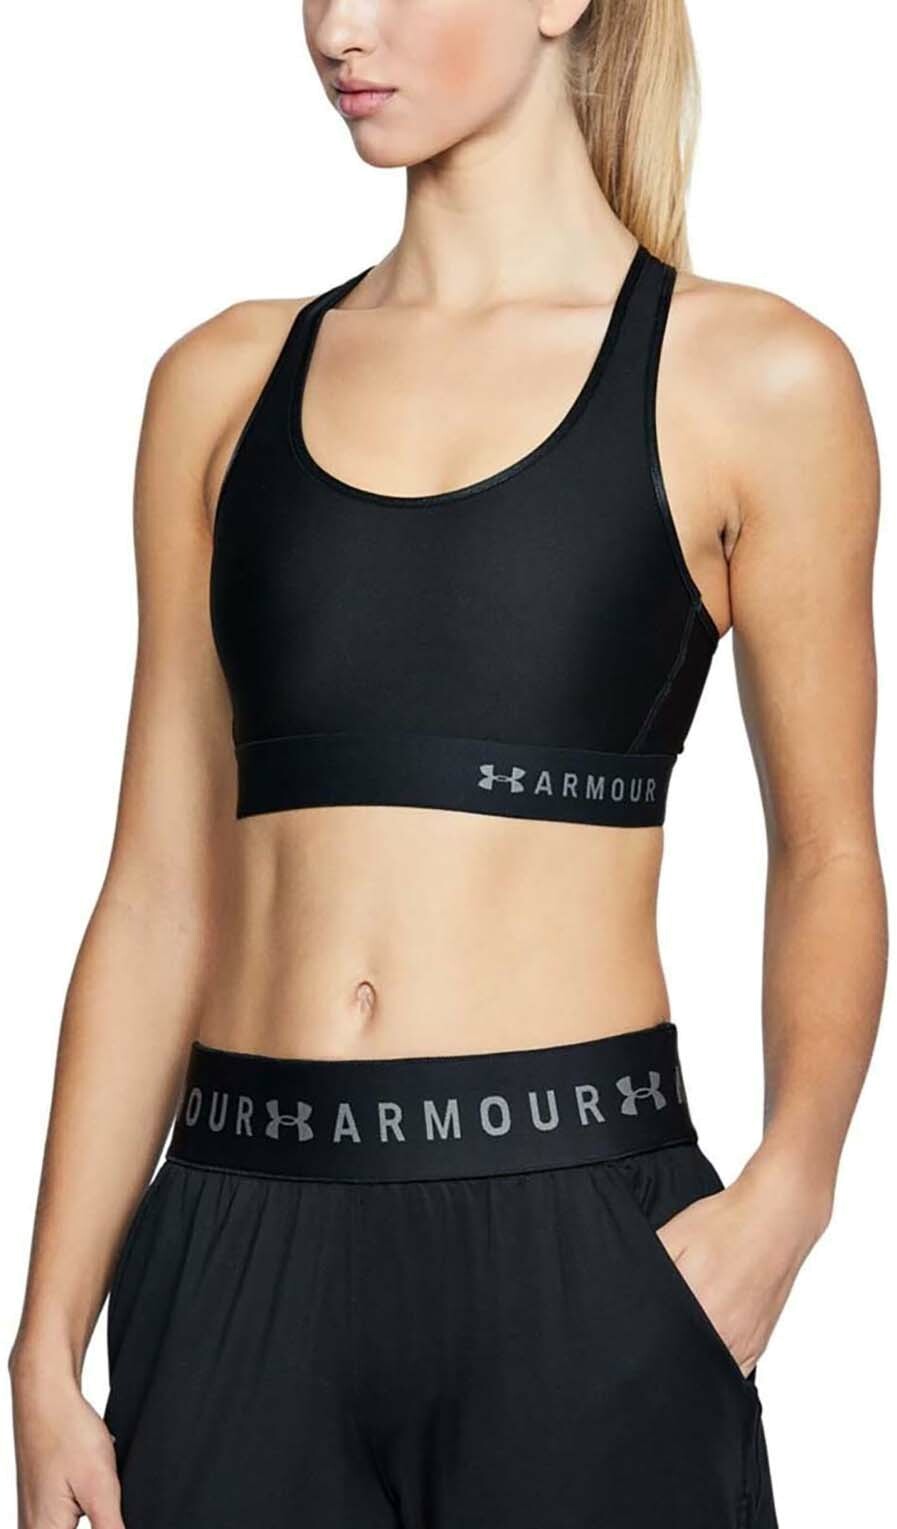 Женский топ Under Armour Armour ® Mid Support 1307196-001